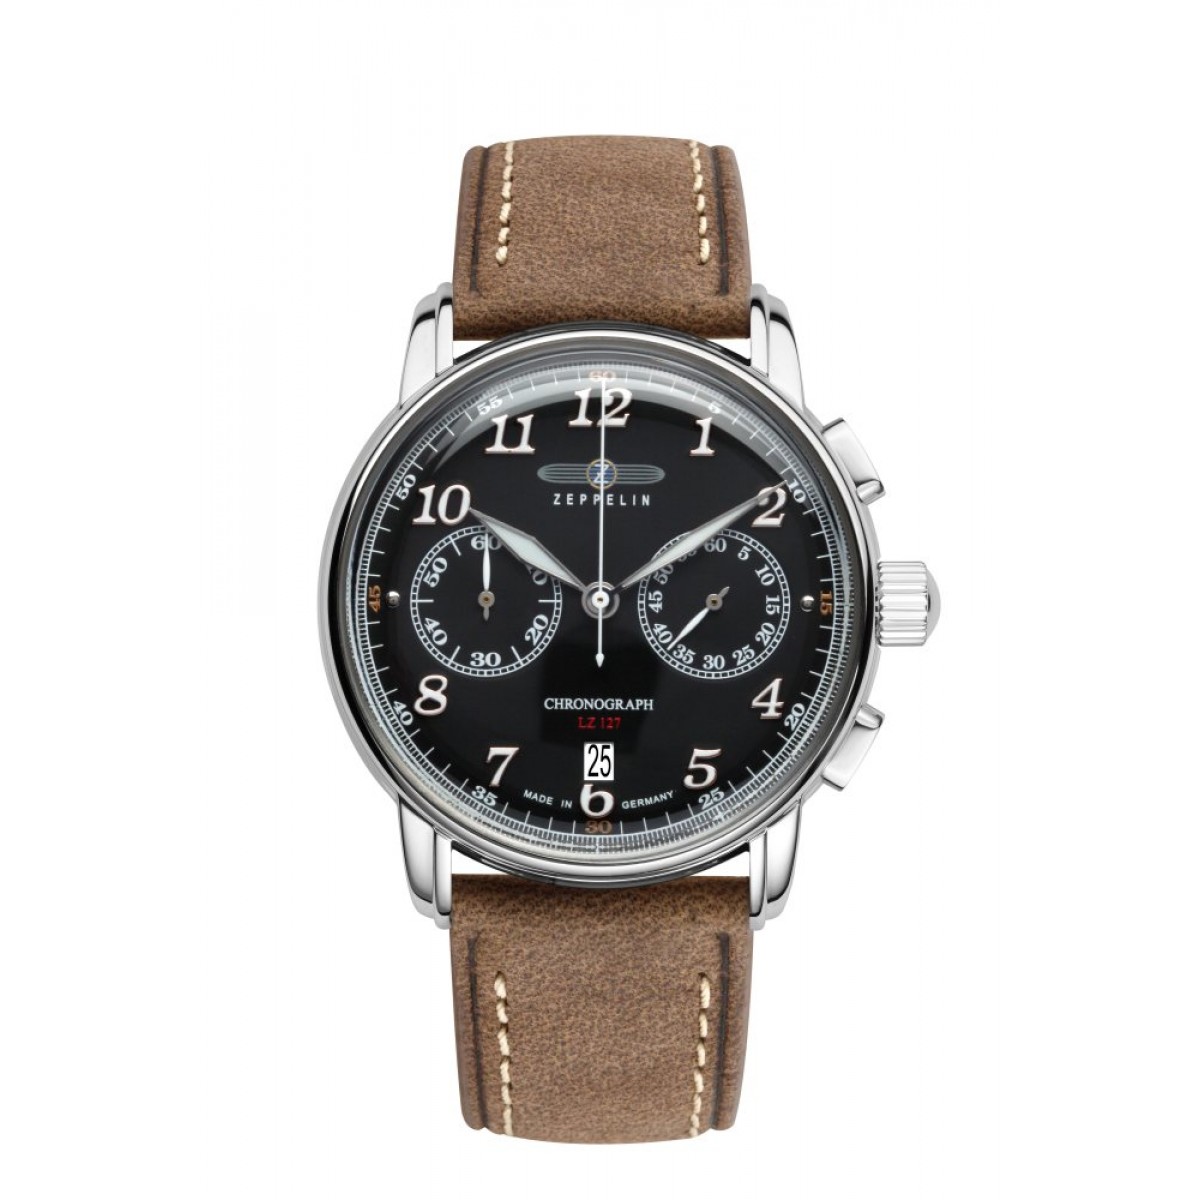 LZ127 Graf Zeppelin Chronograph with leather strap